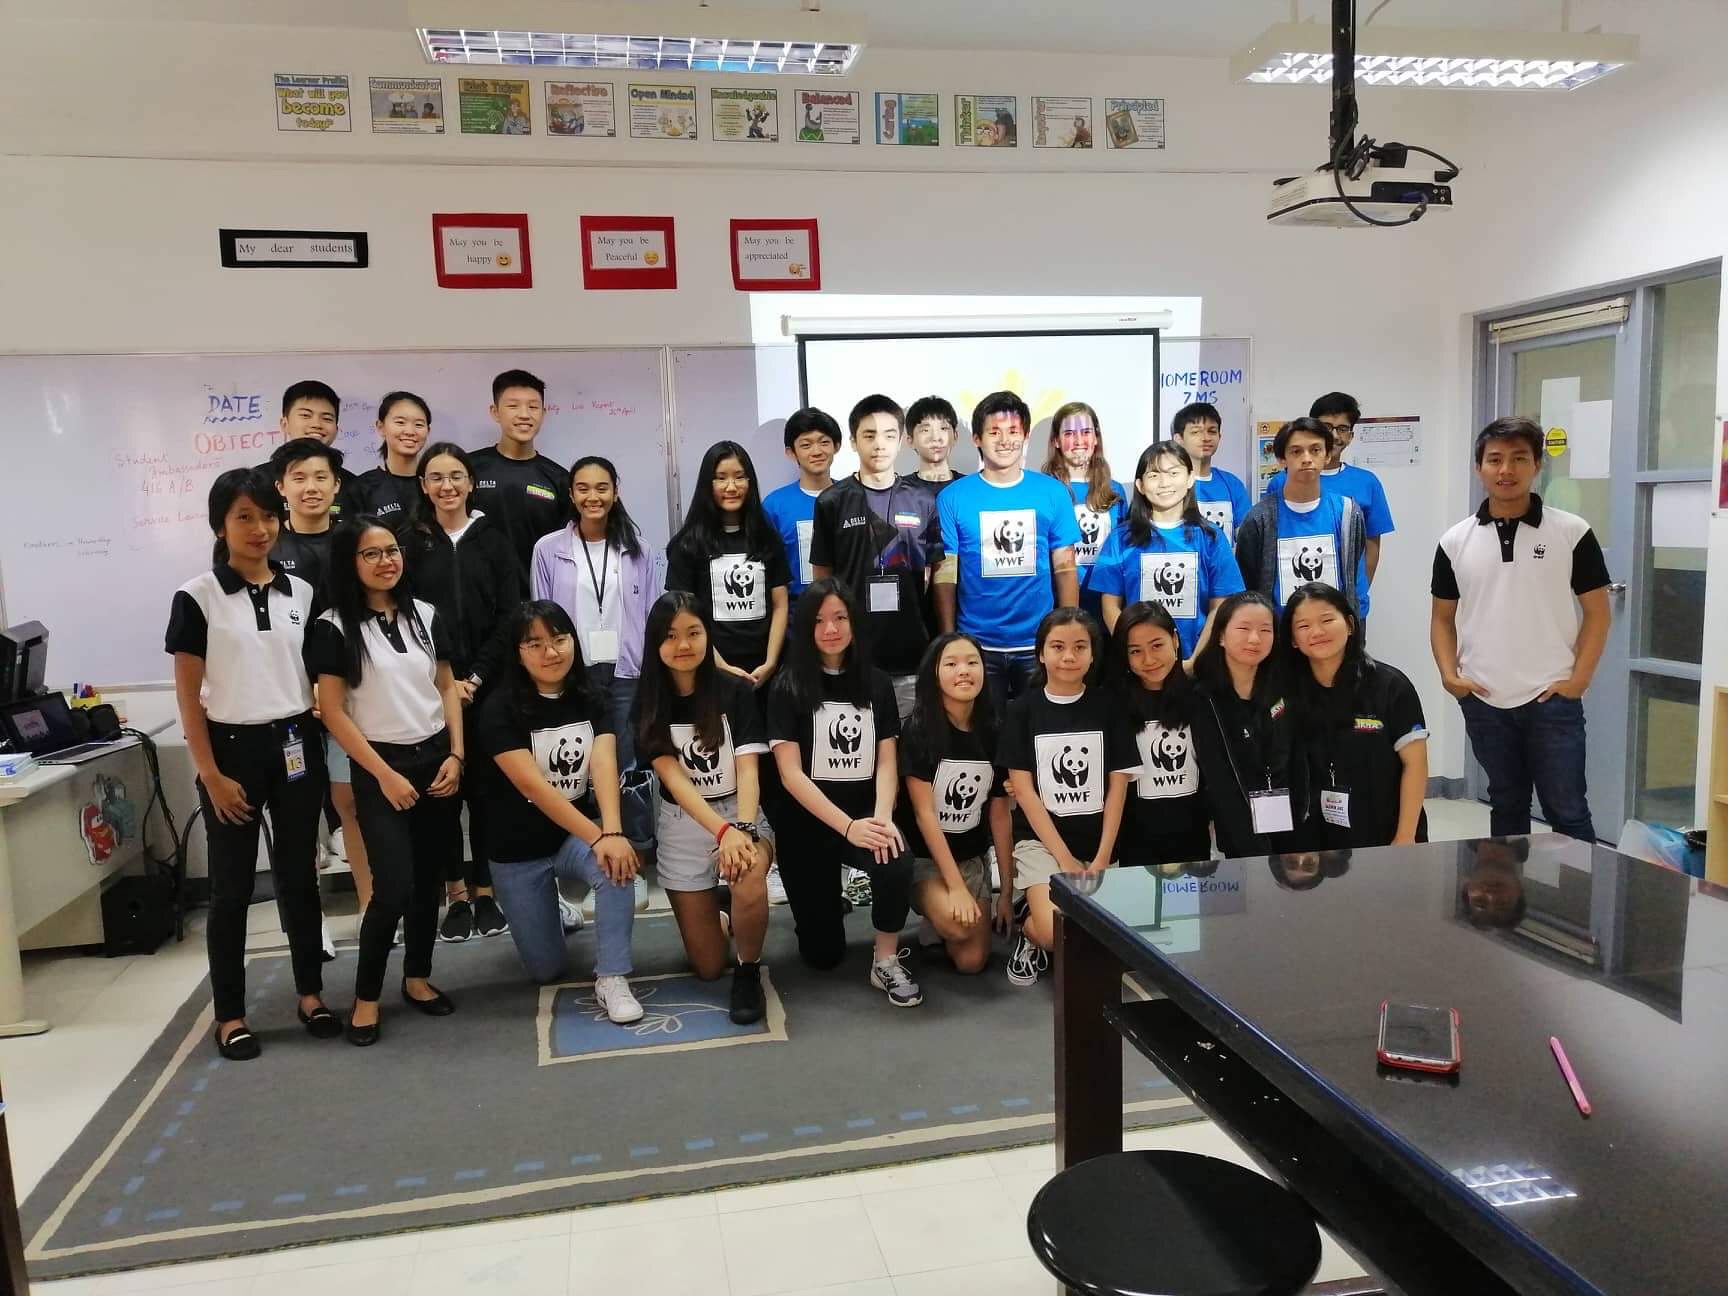 <h1>Chinese International School Manila's Fundraiser</h1>
<p>On April 27 and 28, the Chinese International School Manila hosted the conference, GINila 2019: LIKHA, which was focused on creating a brighter, more sustainable future. </p>
<p style="text-align: right;"><a href="https://support.wwf.org.ph/cism-fundraiser/">Read More &gt;</a></p>